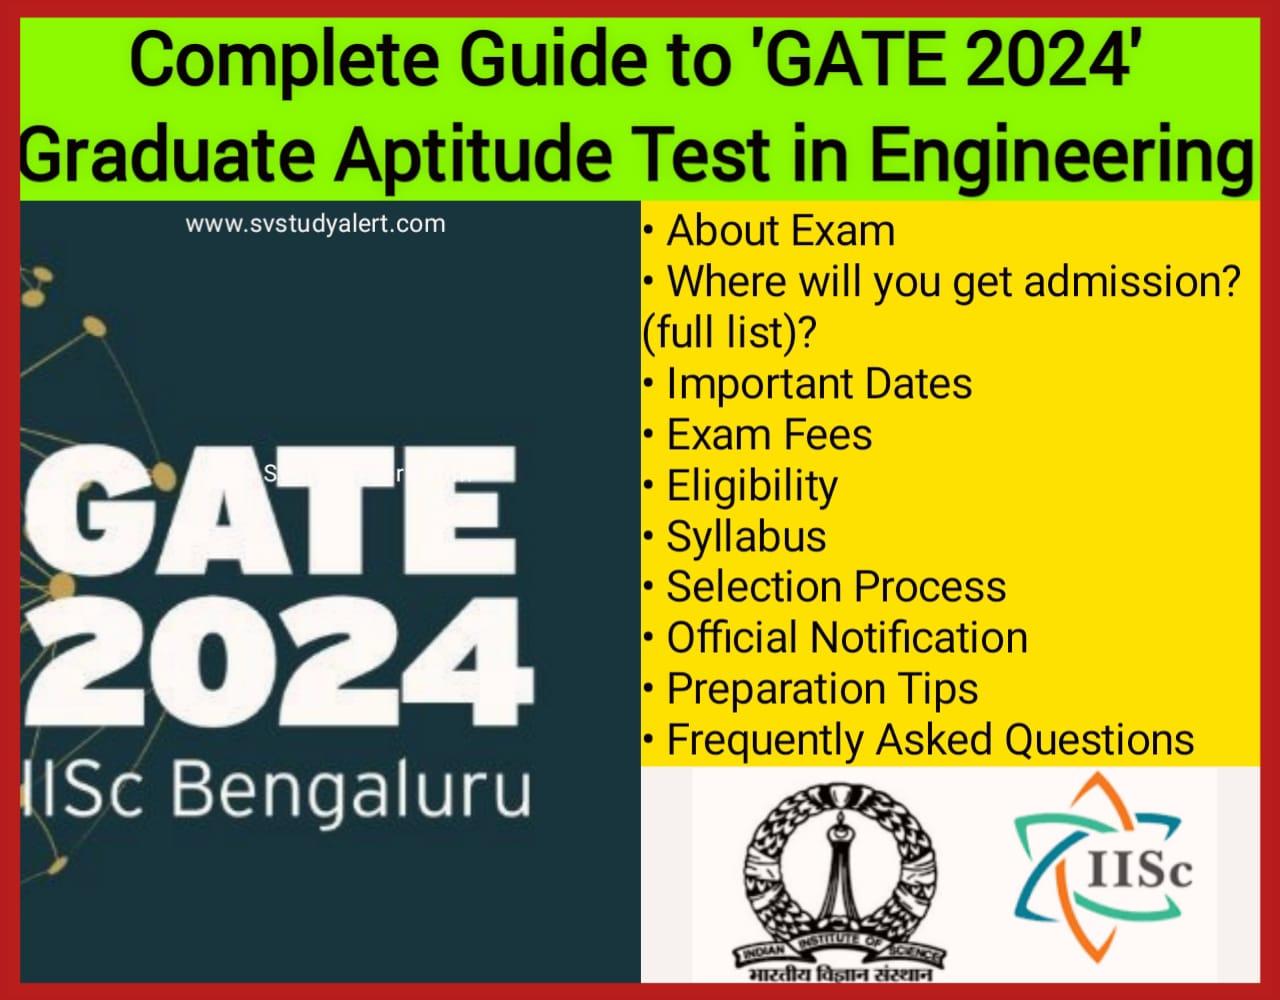 Welcome to the gateway of endless possibilities in the world of engineering ? the Graduate Aptitude Test in Engineering, commonly known as GATE. This prestigious examination is not just a test